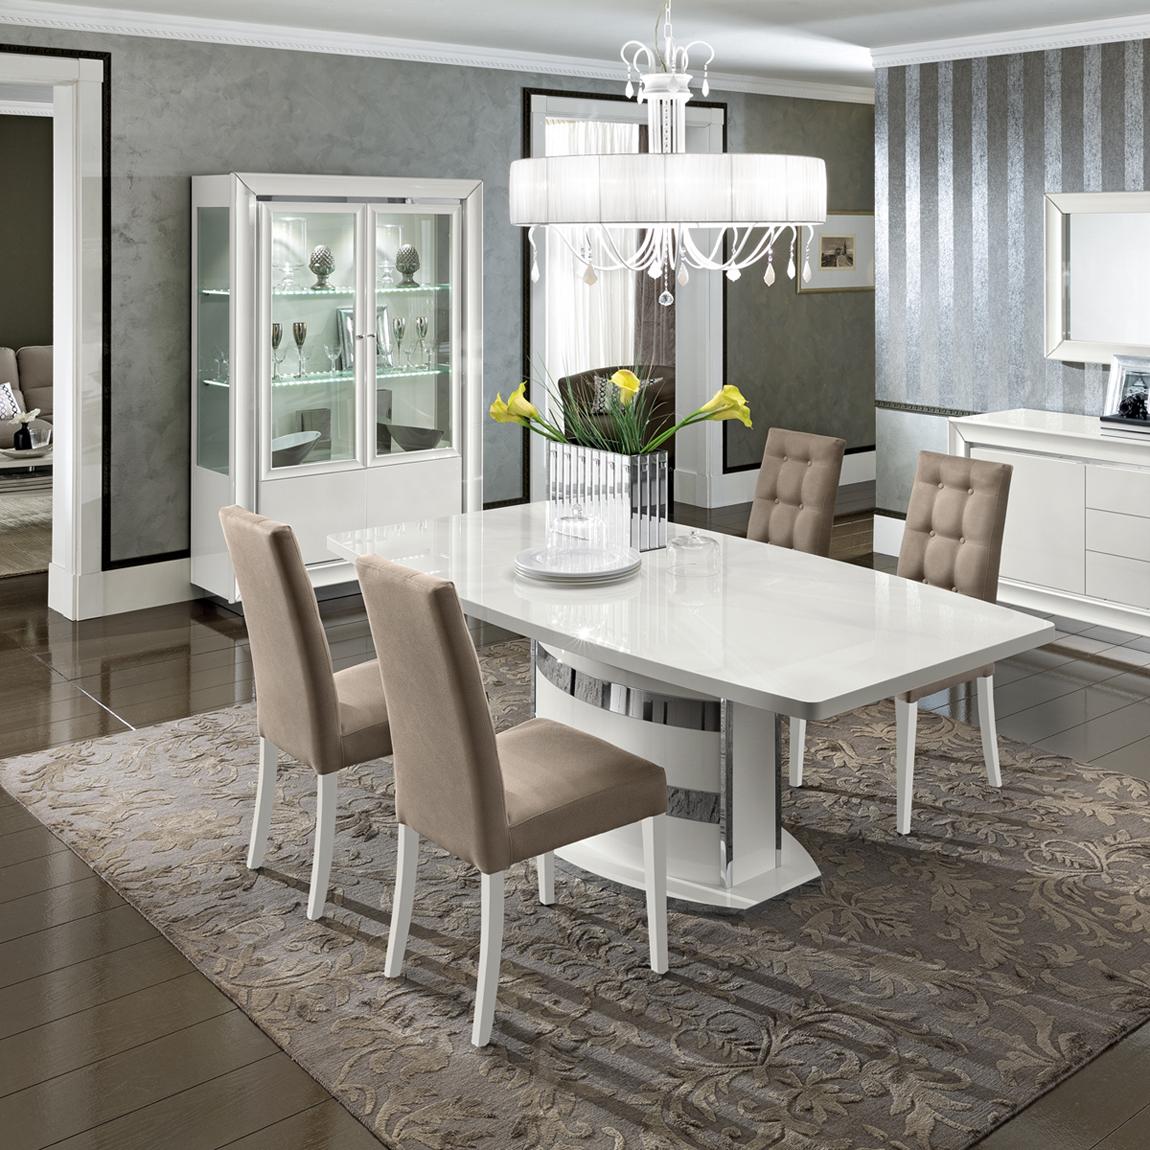 Contemporary, Modern Dining Table Set Dama Bianca Dama Bianca-Dining-5PC in White, Beige Fabric